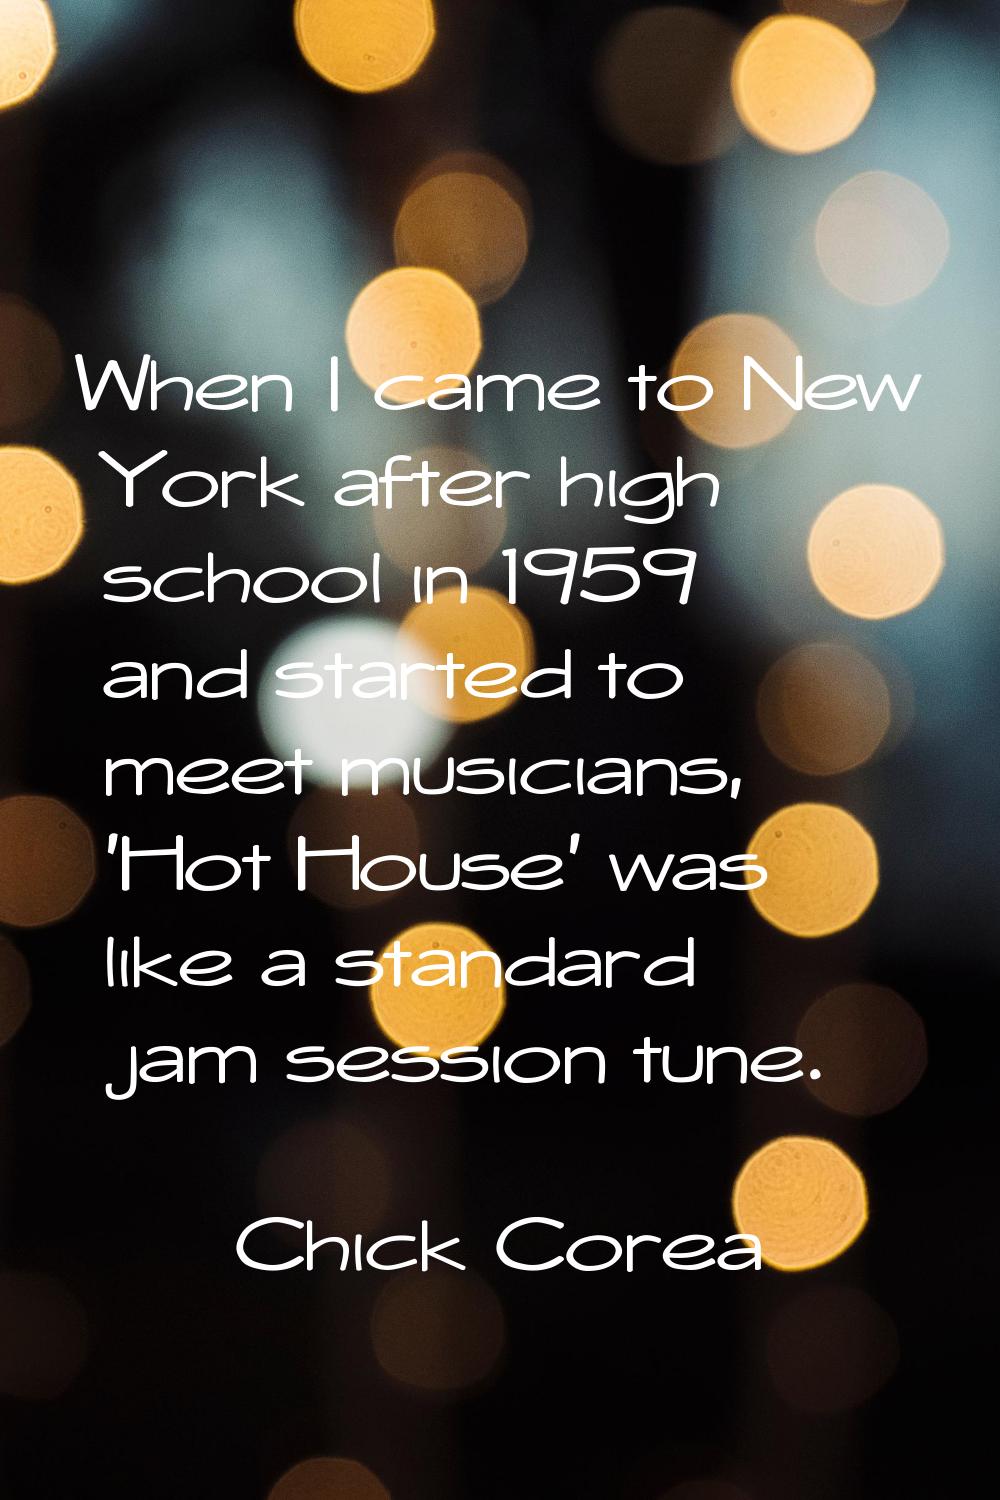 When I came to New York after high school in 1959 and started to meet musicians, 'Hot House' was li